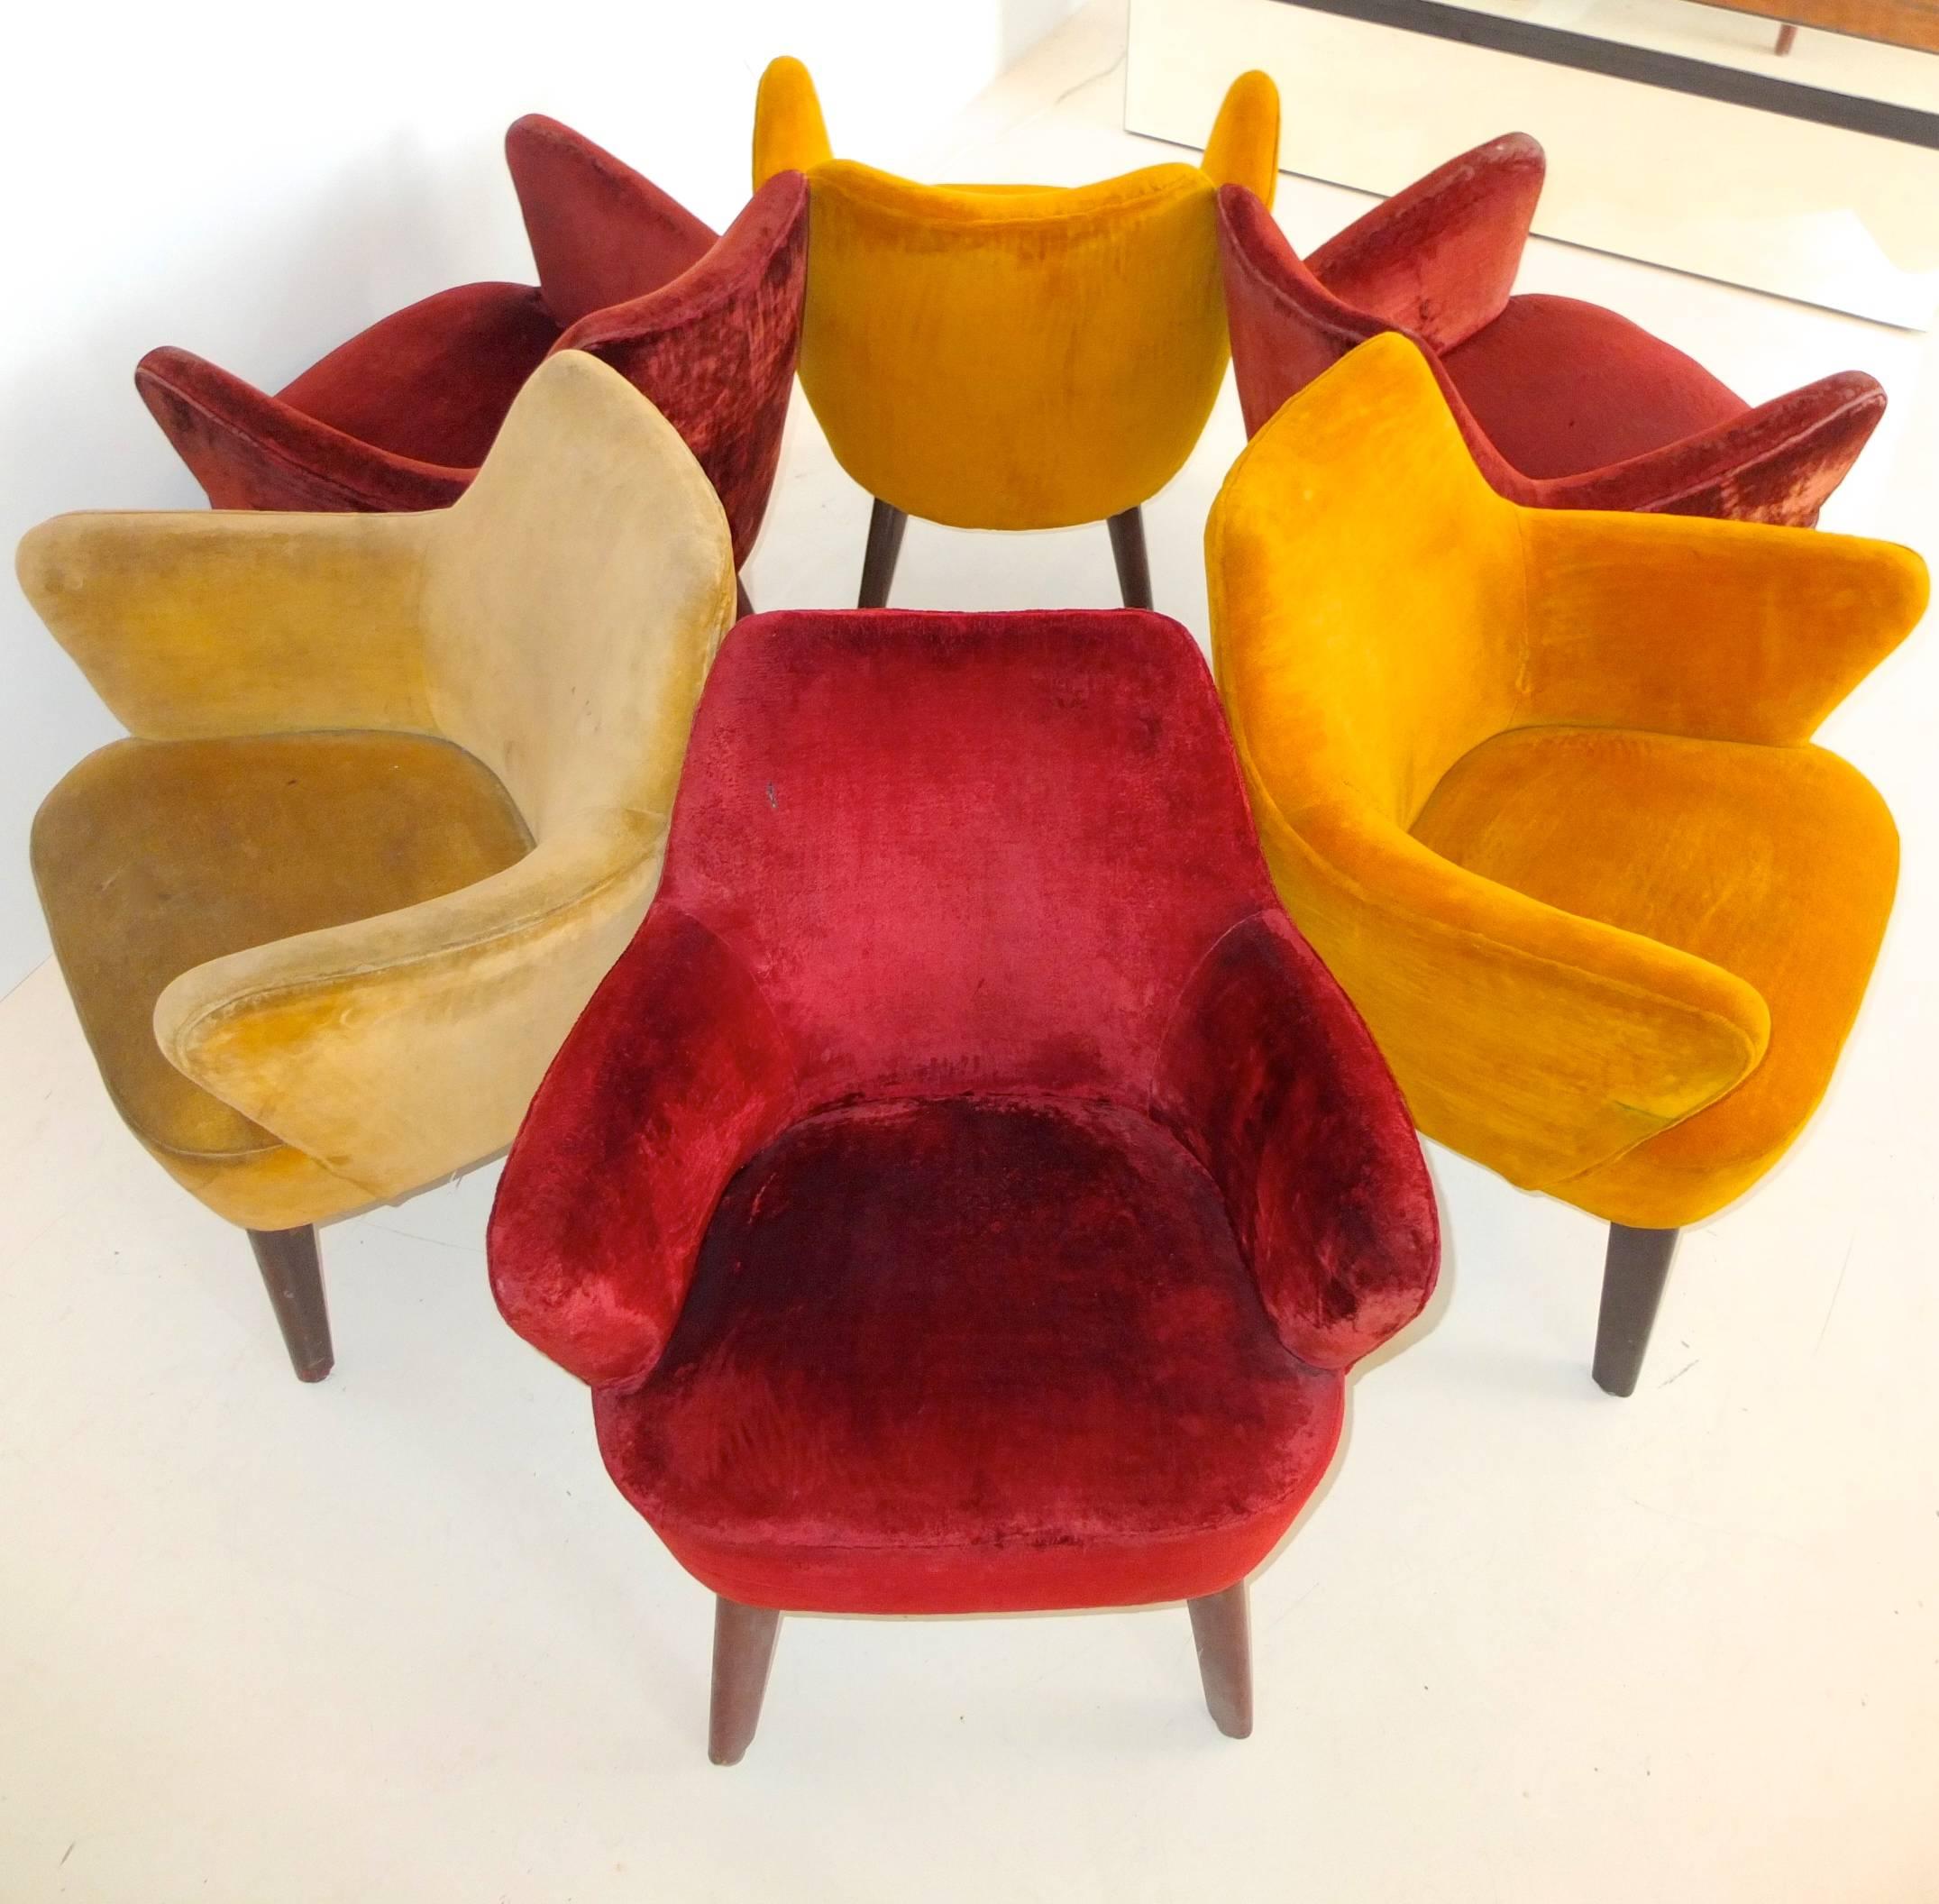 Three pairs of extremely rare and highly coveted chairs designed by Gio Ponti and produced by Cassina, Italy for the First Class bar of Italia Line's MV Augustus ocean liner. 
These were salvaged from the famed liner at the ship breakers in Alang,